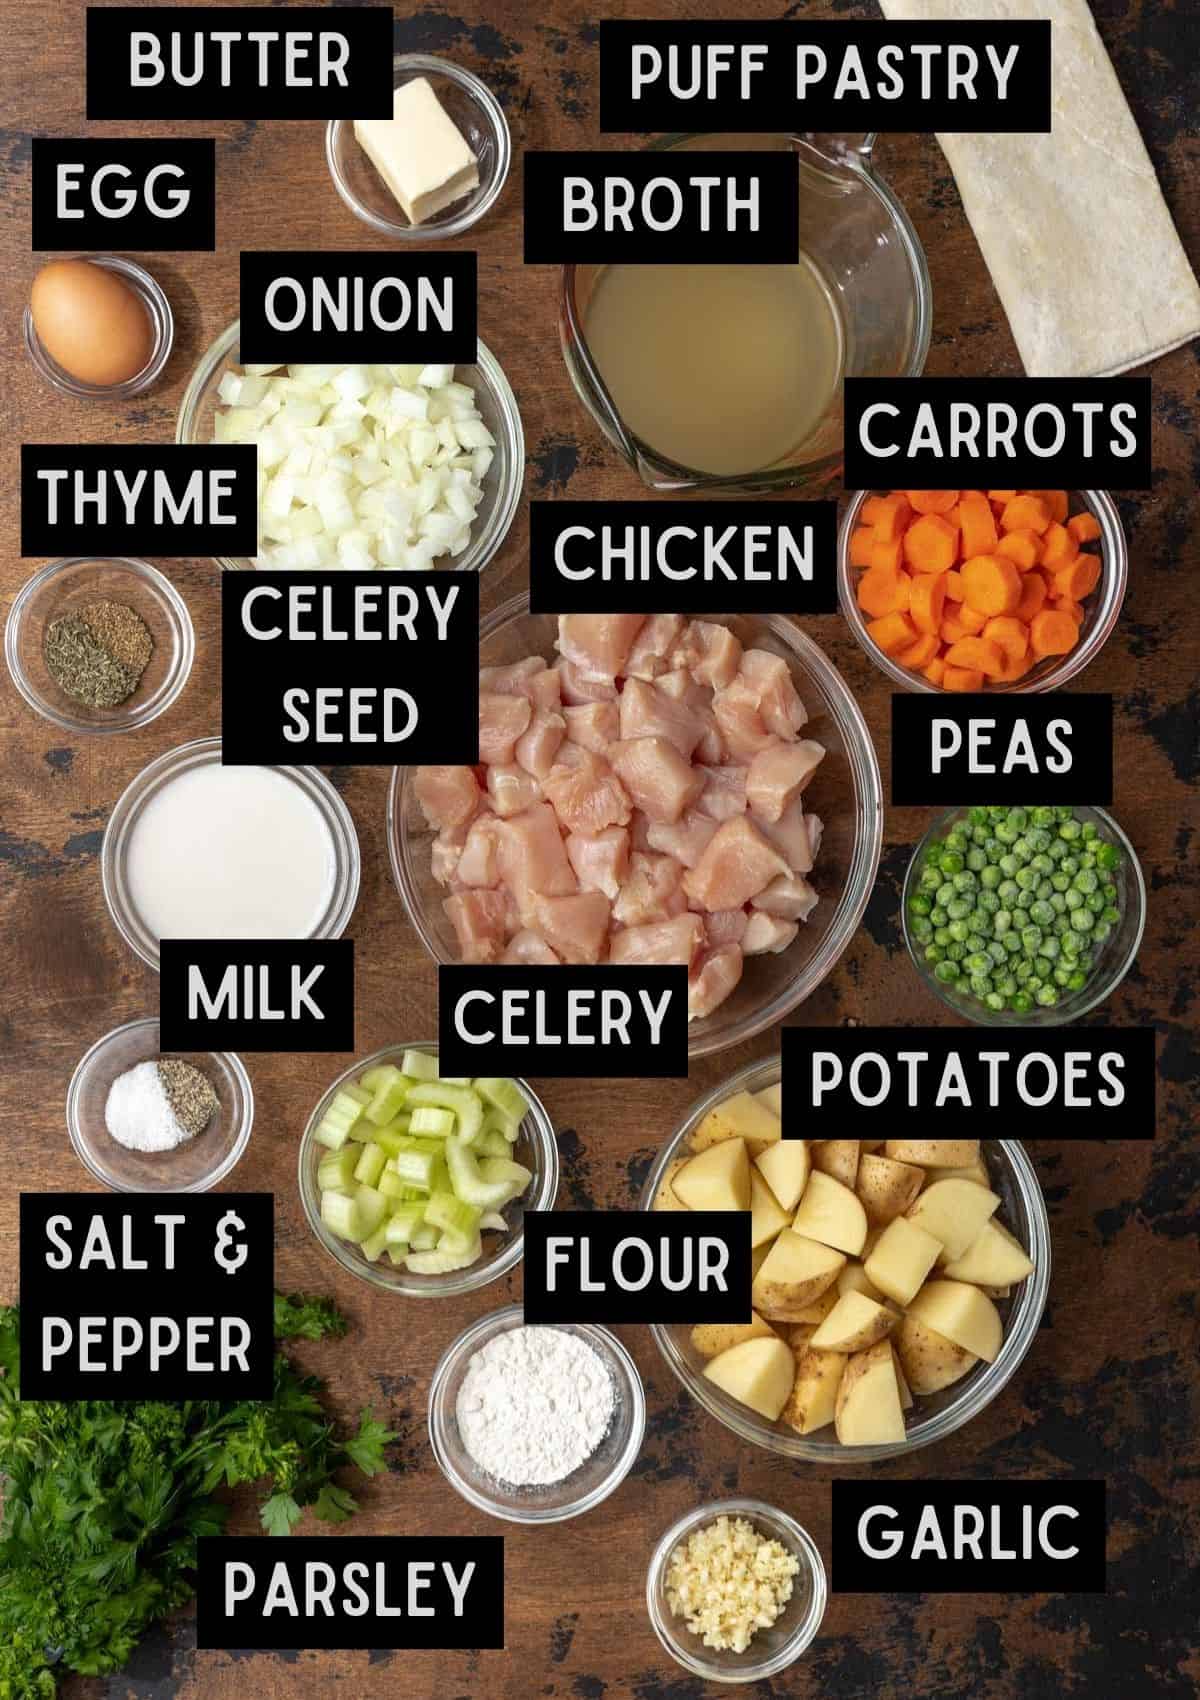 Labelled ingredients for instant pot chicken pot pie (see recipe for details).